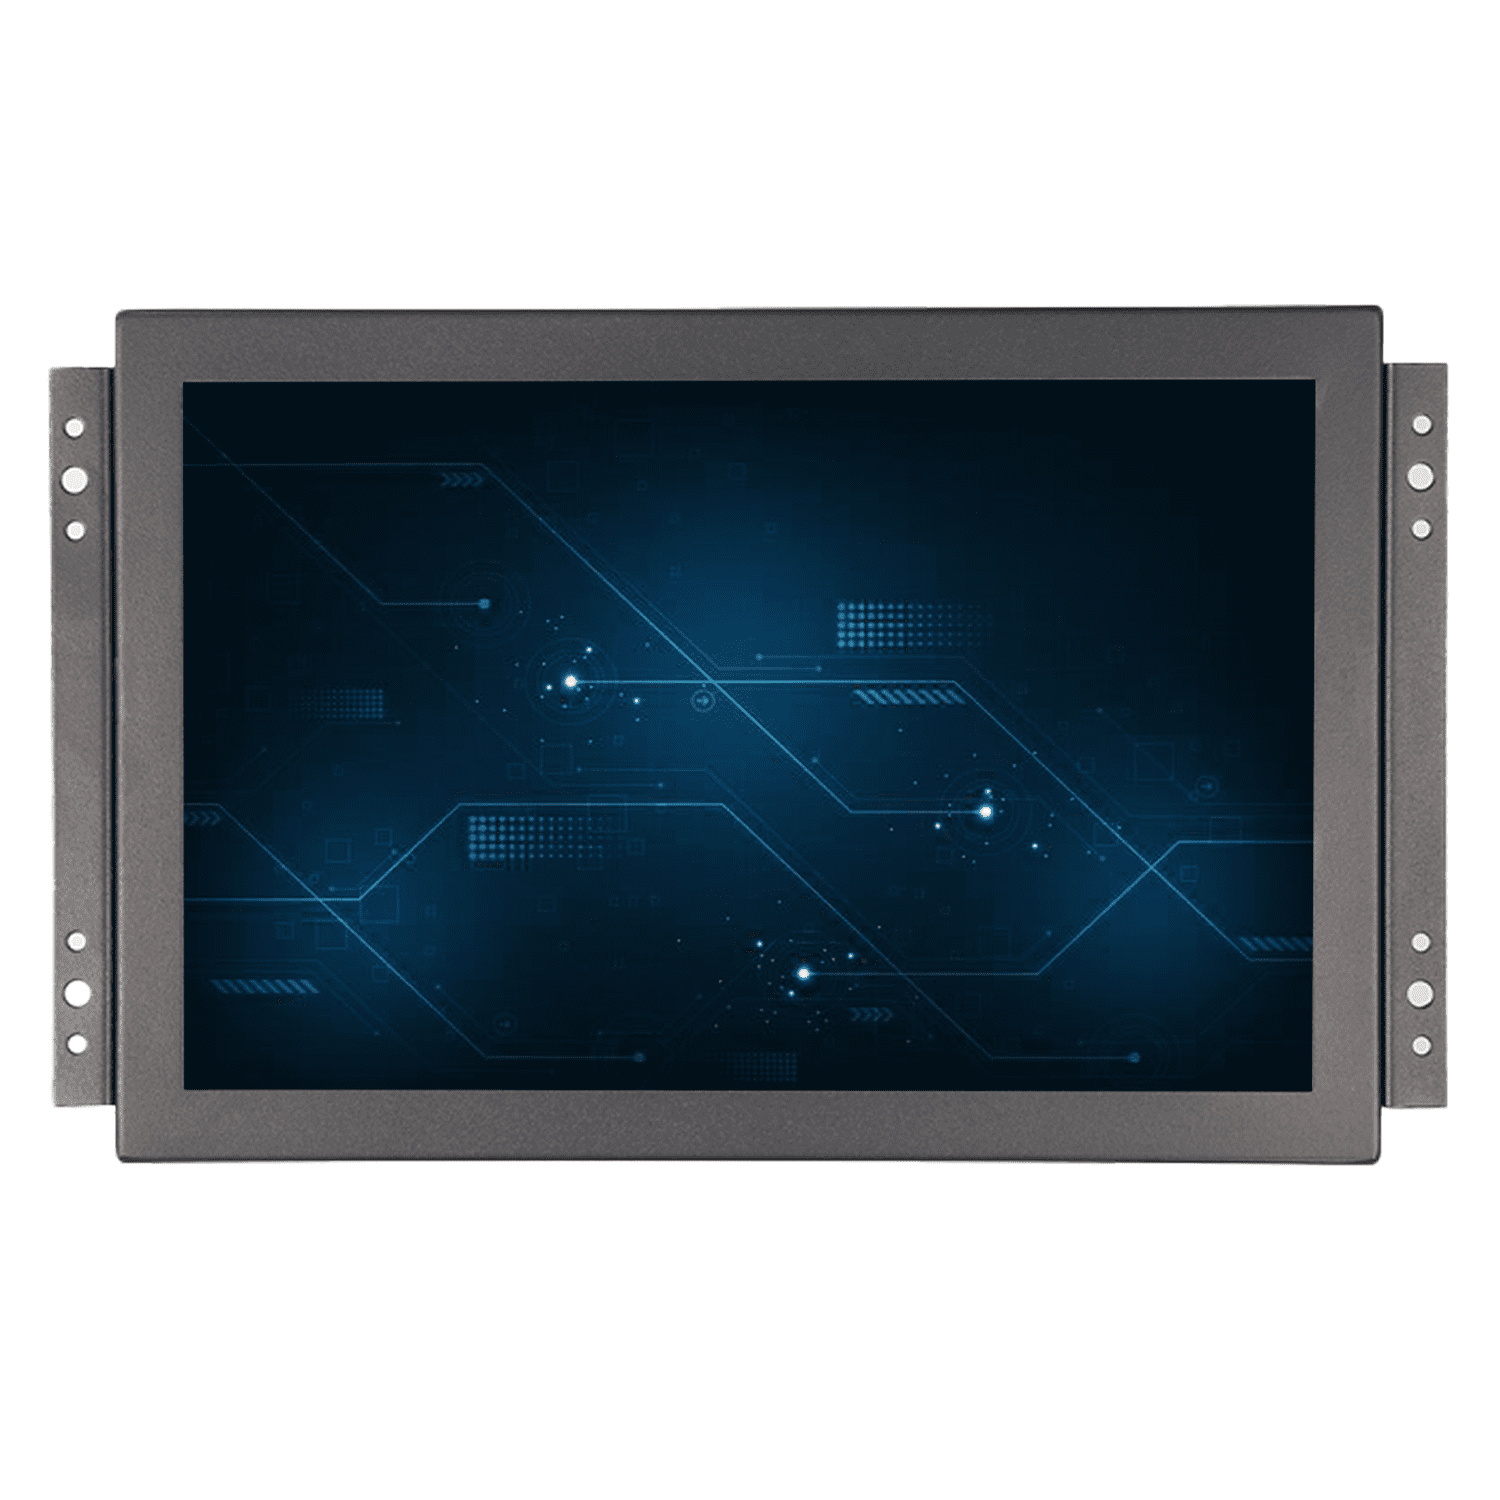 10.1 inch touch screen monitor - 副本